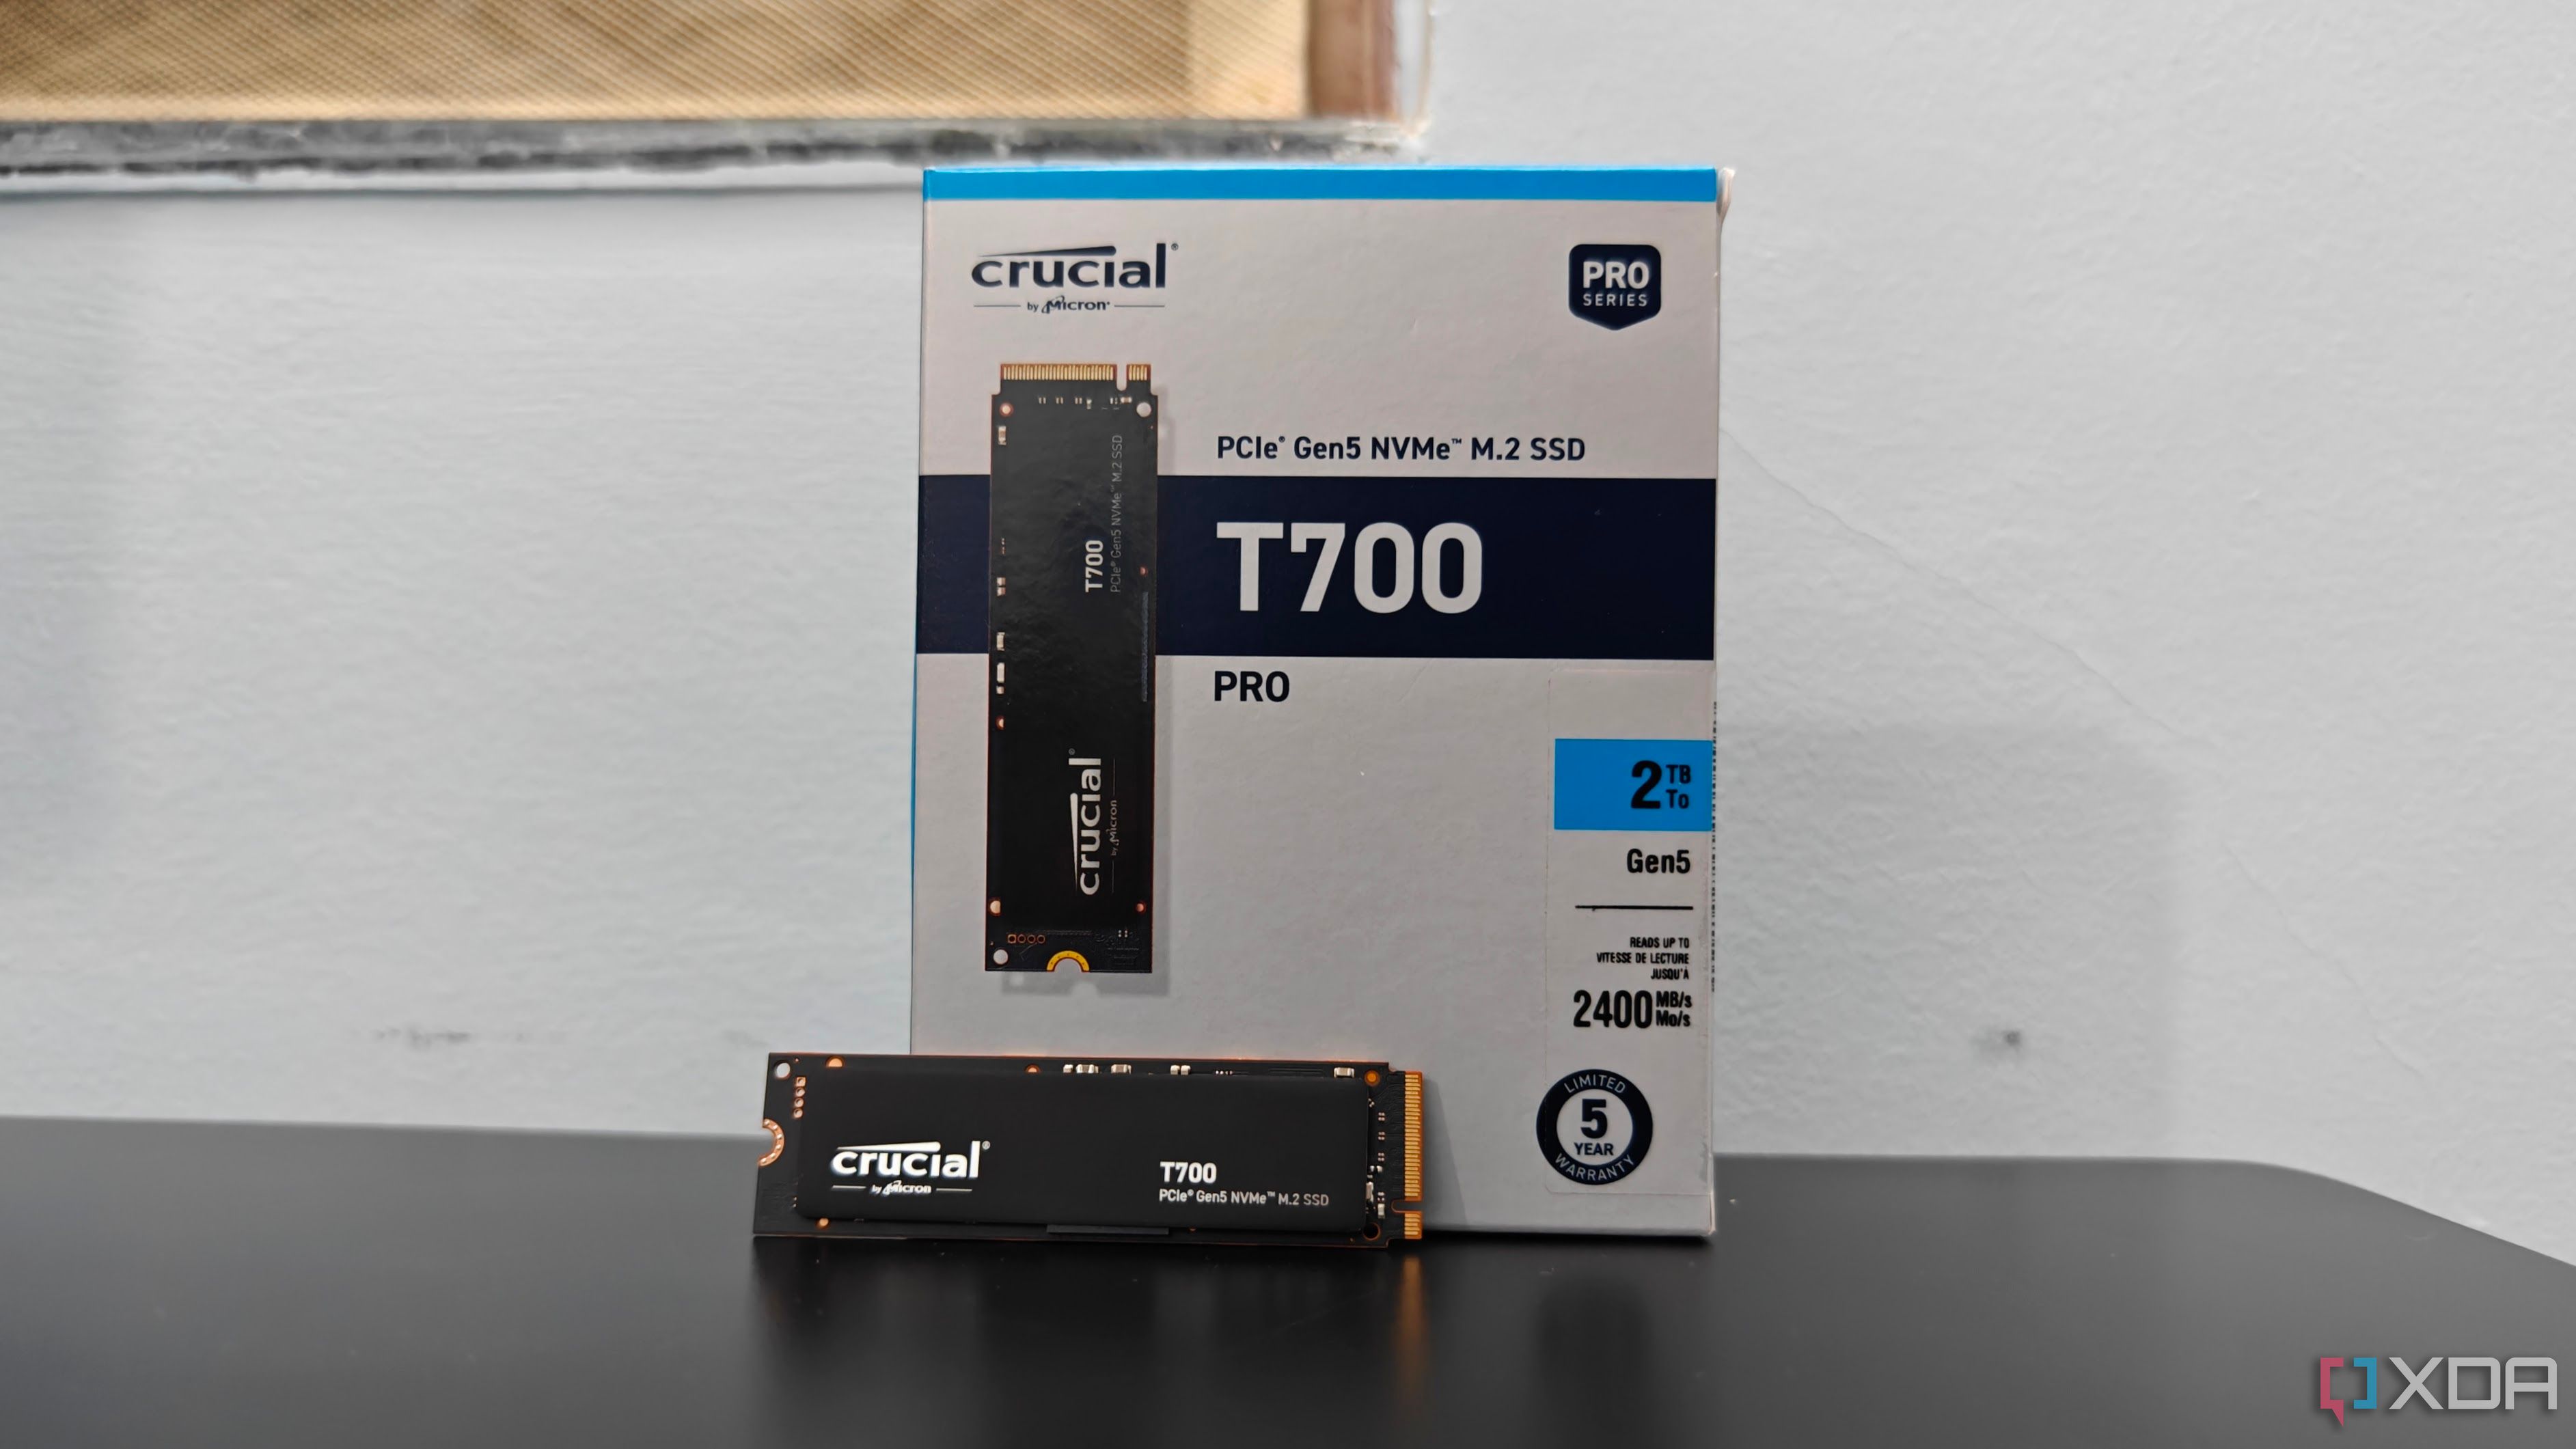 Crucial T700 SSD review: The king of PCIe Gen5 SSDs